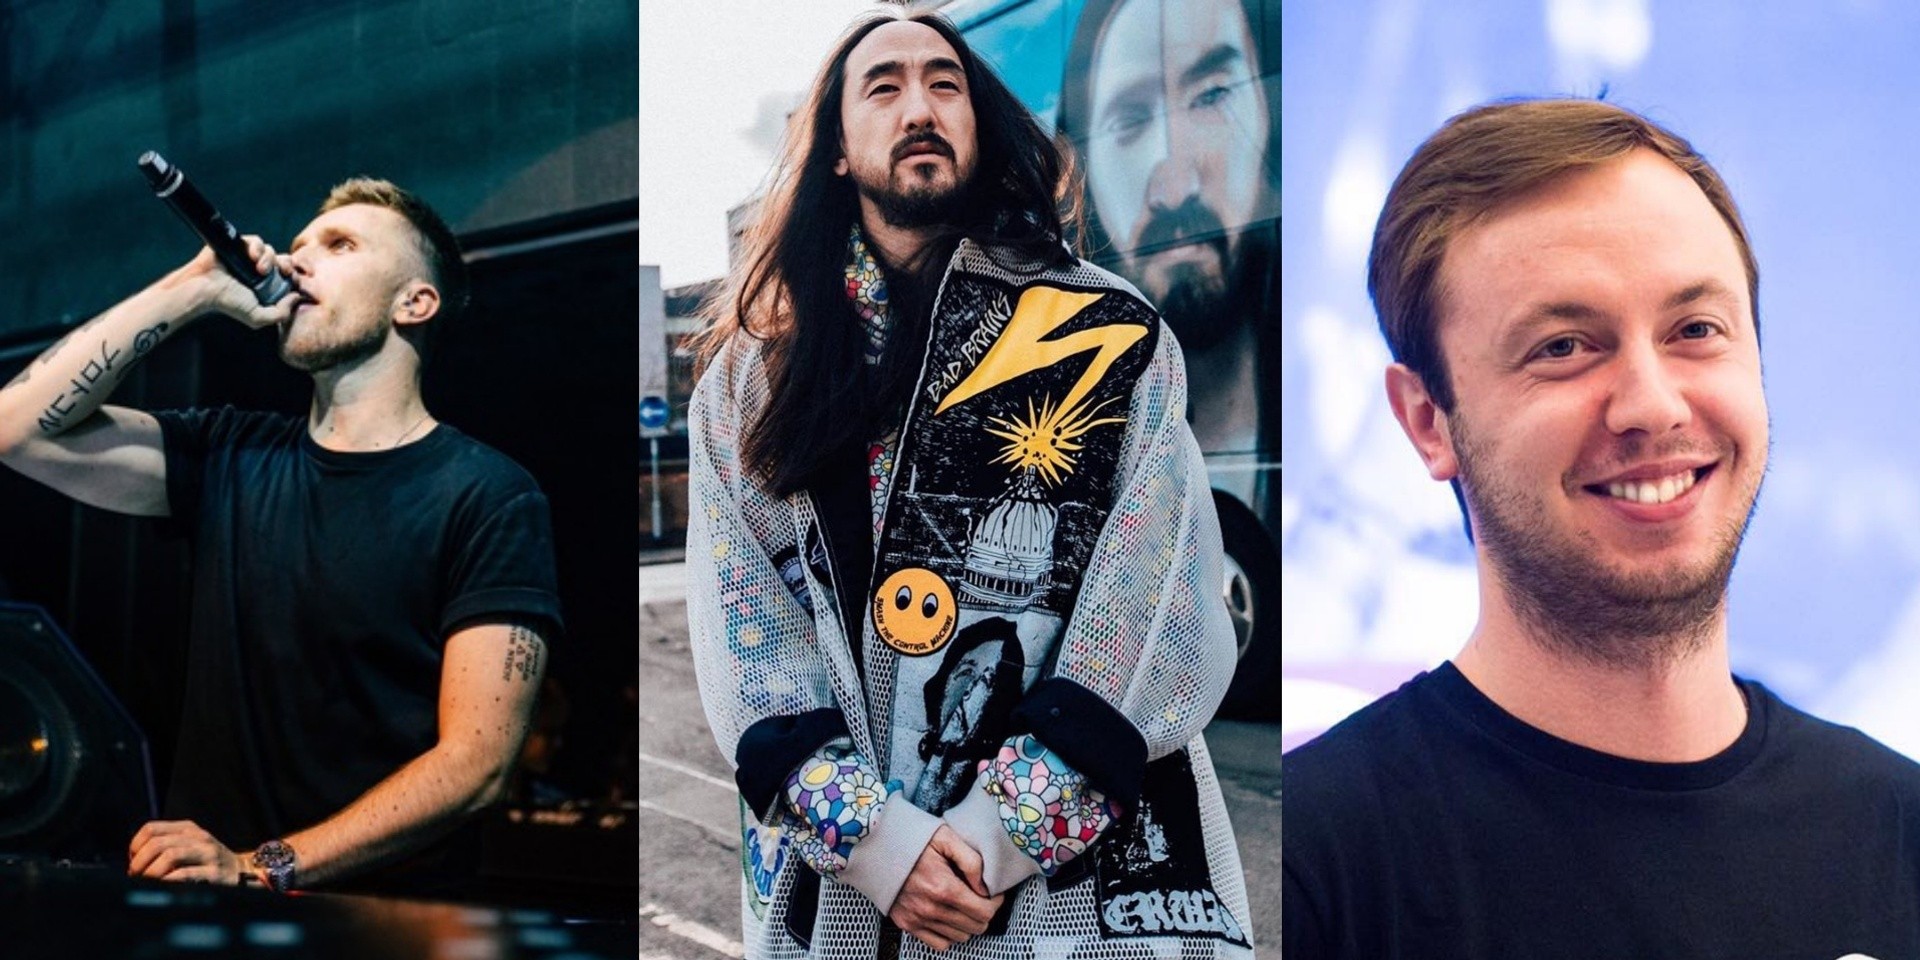 MARQUEE turns 1 with virtual party featuring performances by Nicky Romero, Steve Aoki, and more